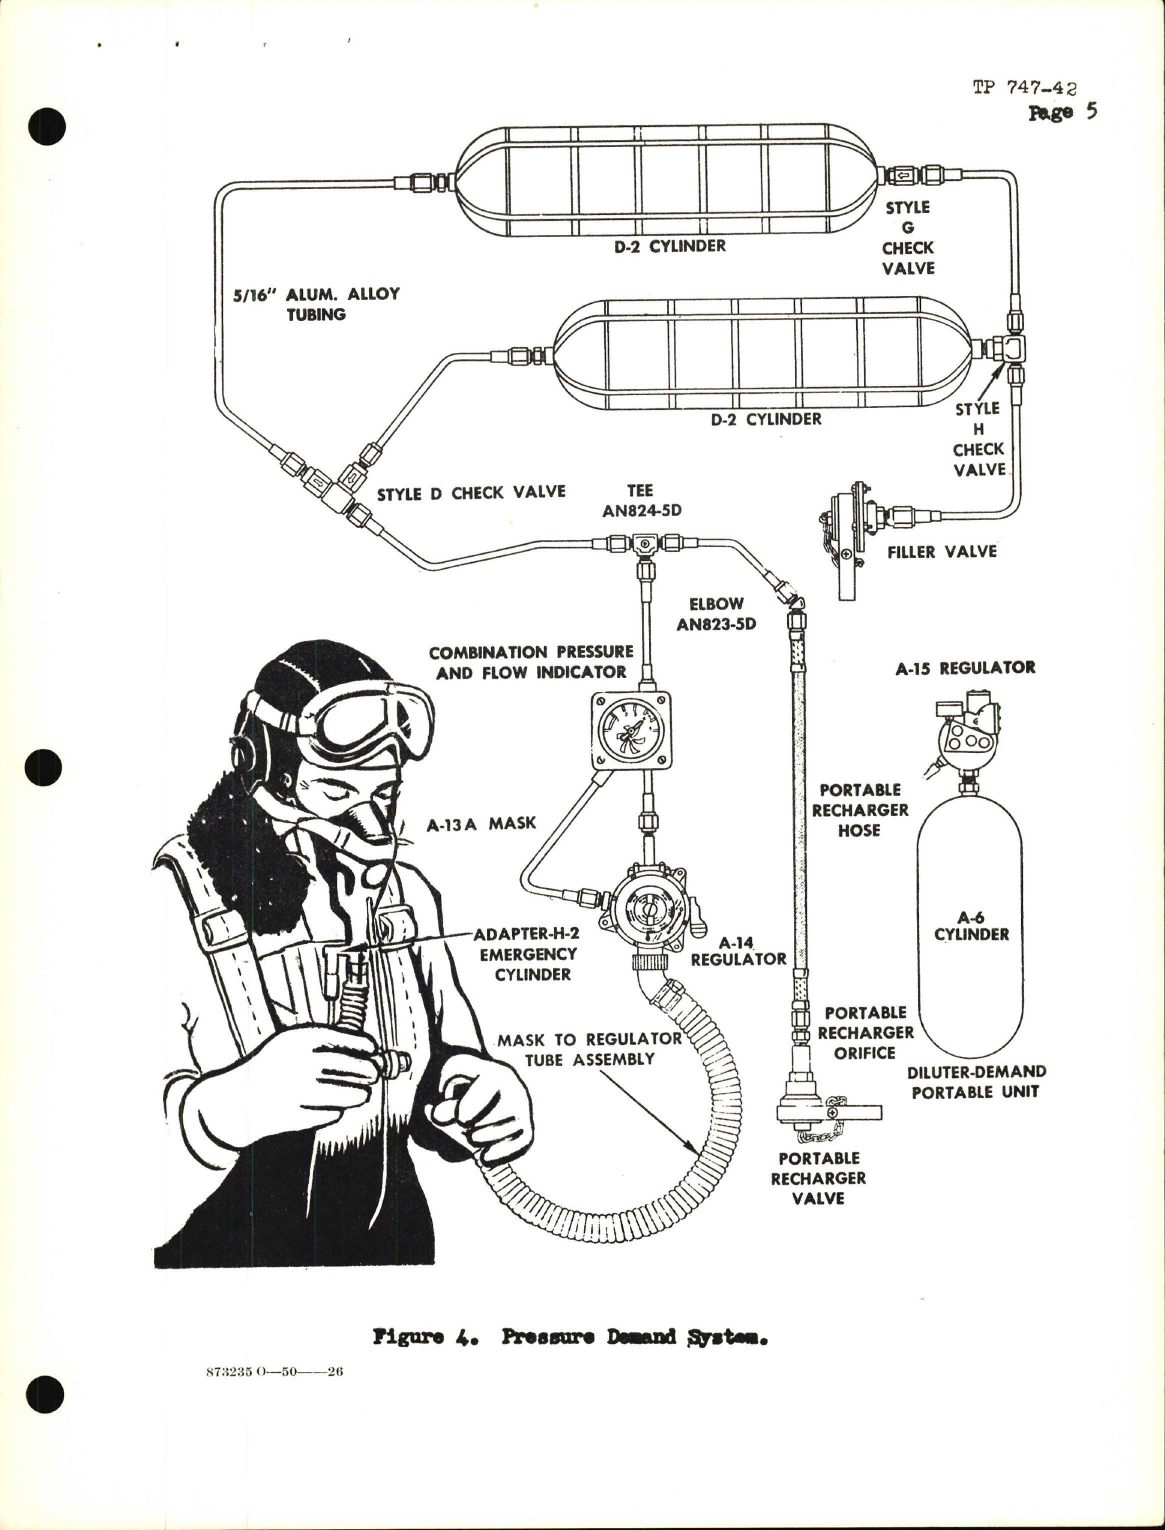 Sample page 5 from AirCorps Library document: Training Project, Oxygen Systems